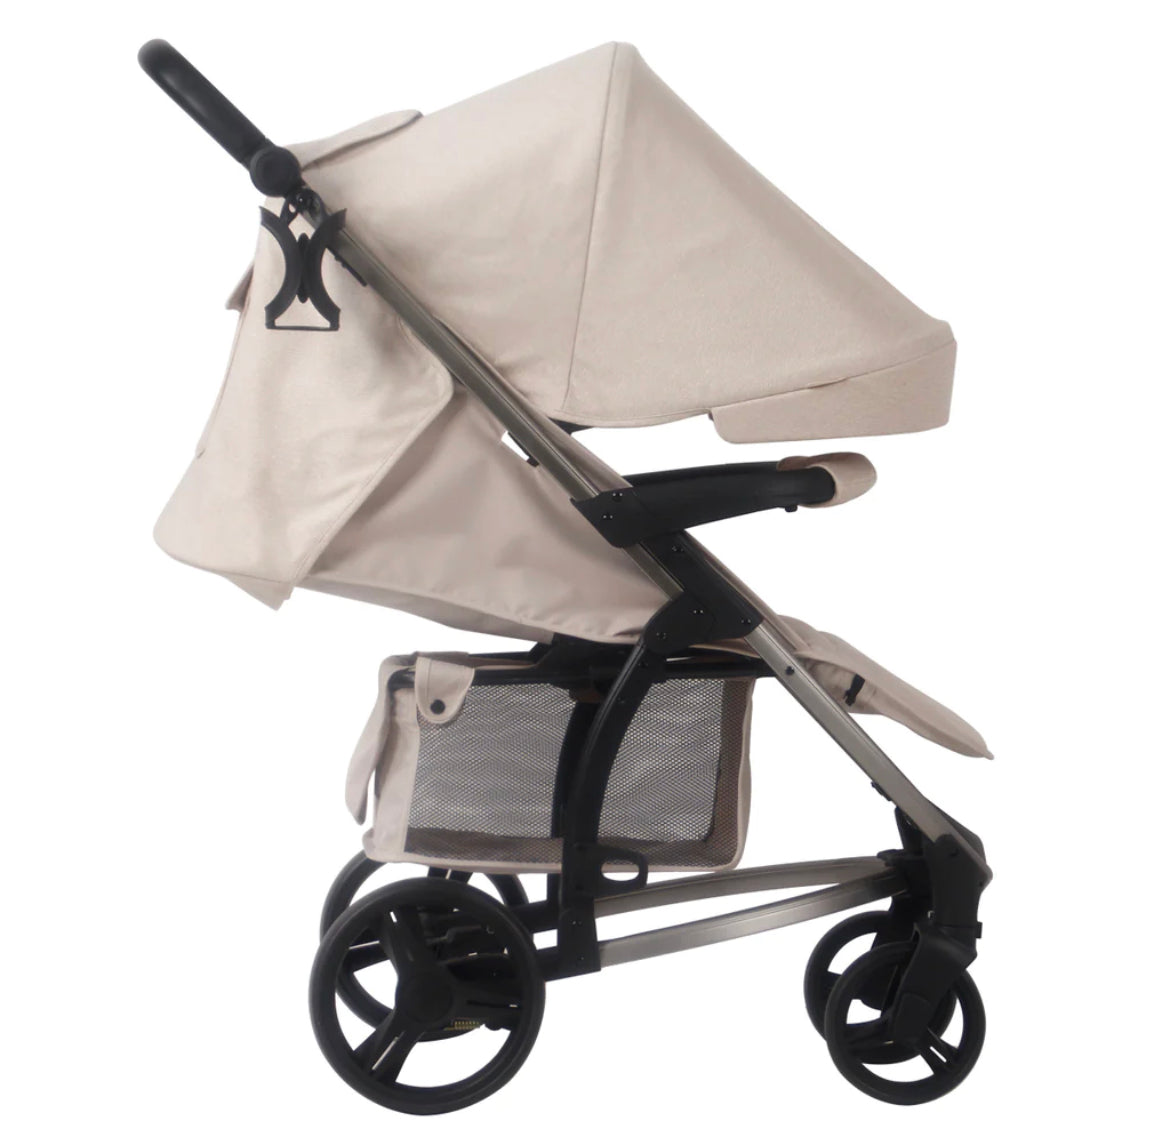 My Babiie MB200i Billie Faiers Oatmeal iSize Travel System